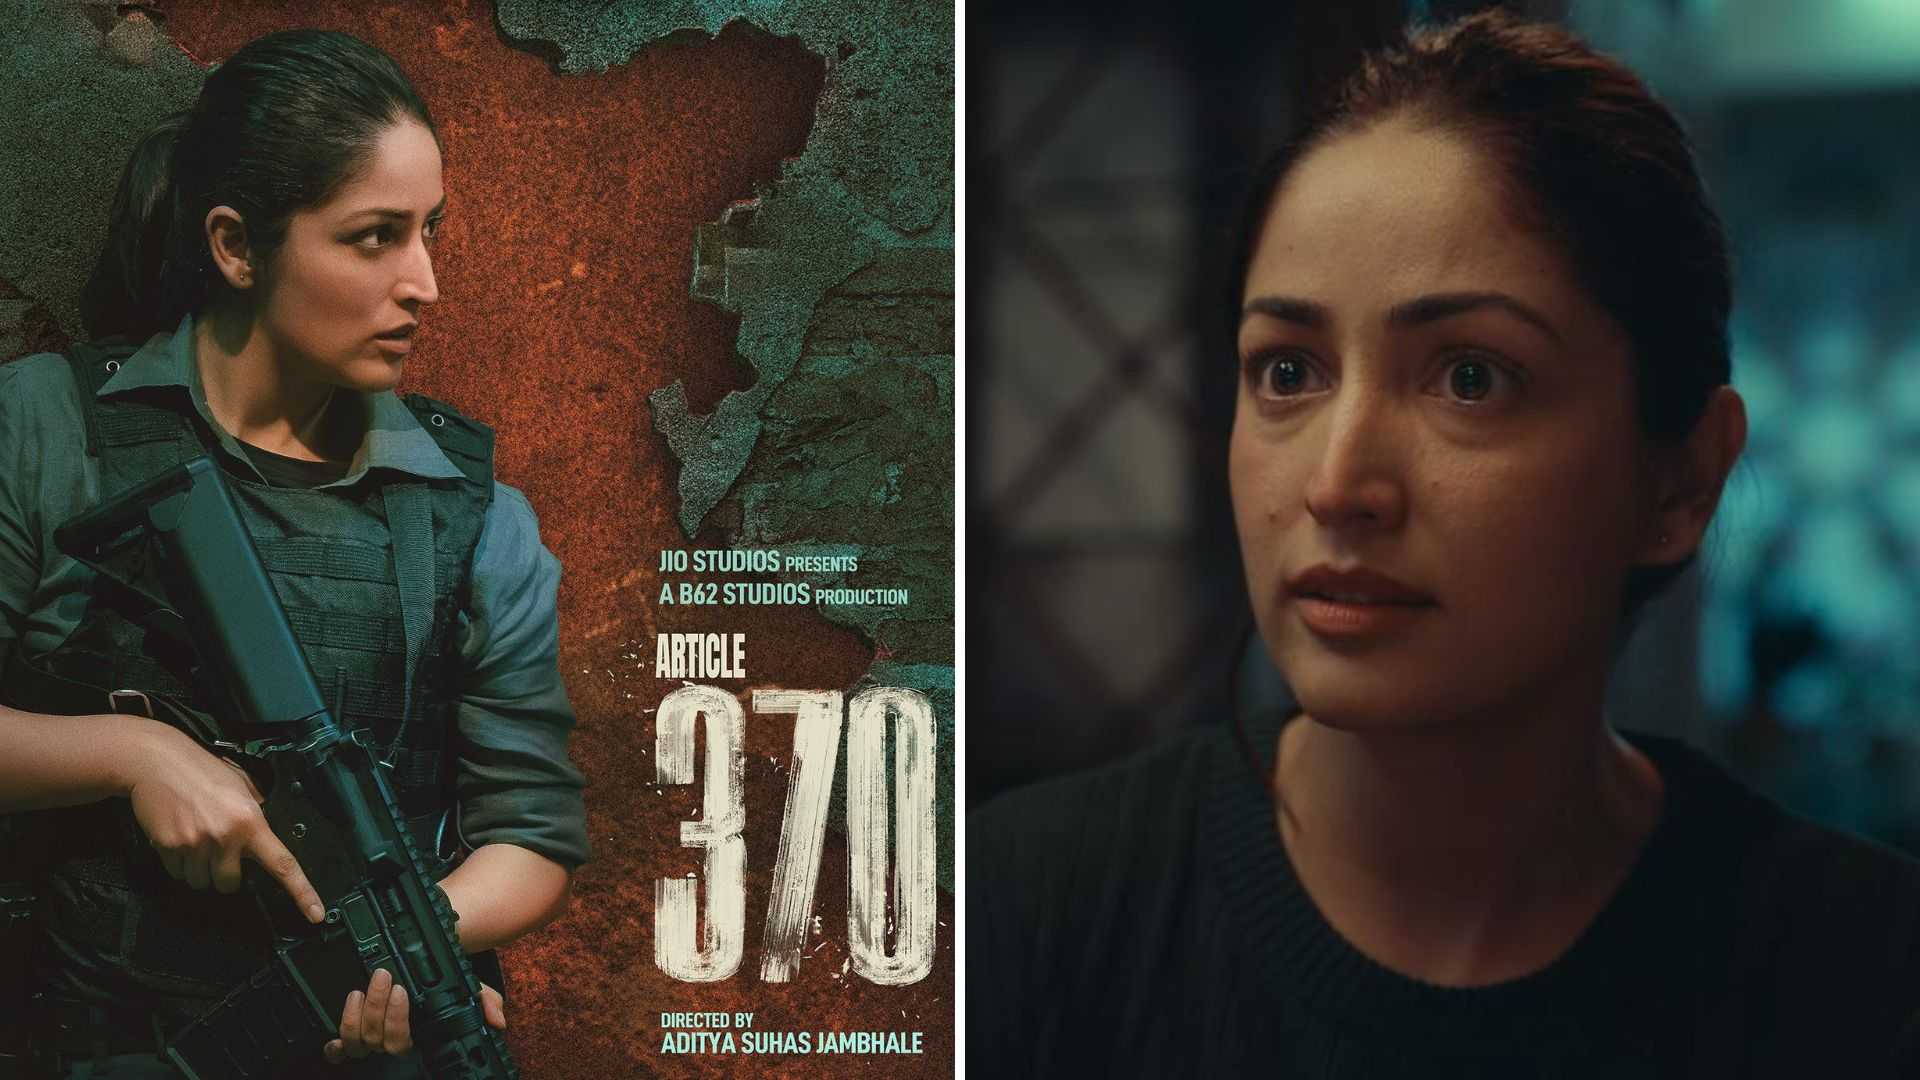 Article 370 Movie Review: Yami Gautam starrer keeps you hooked with the stellar performances and screenplay